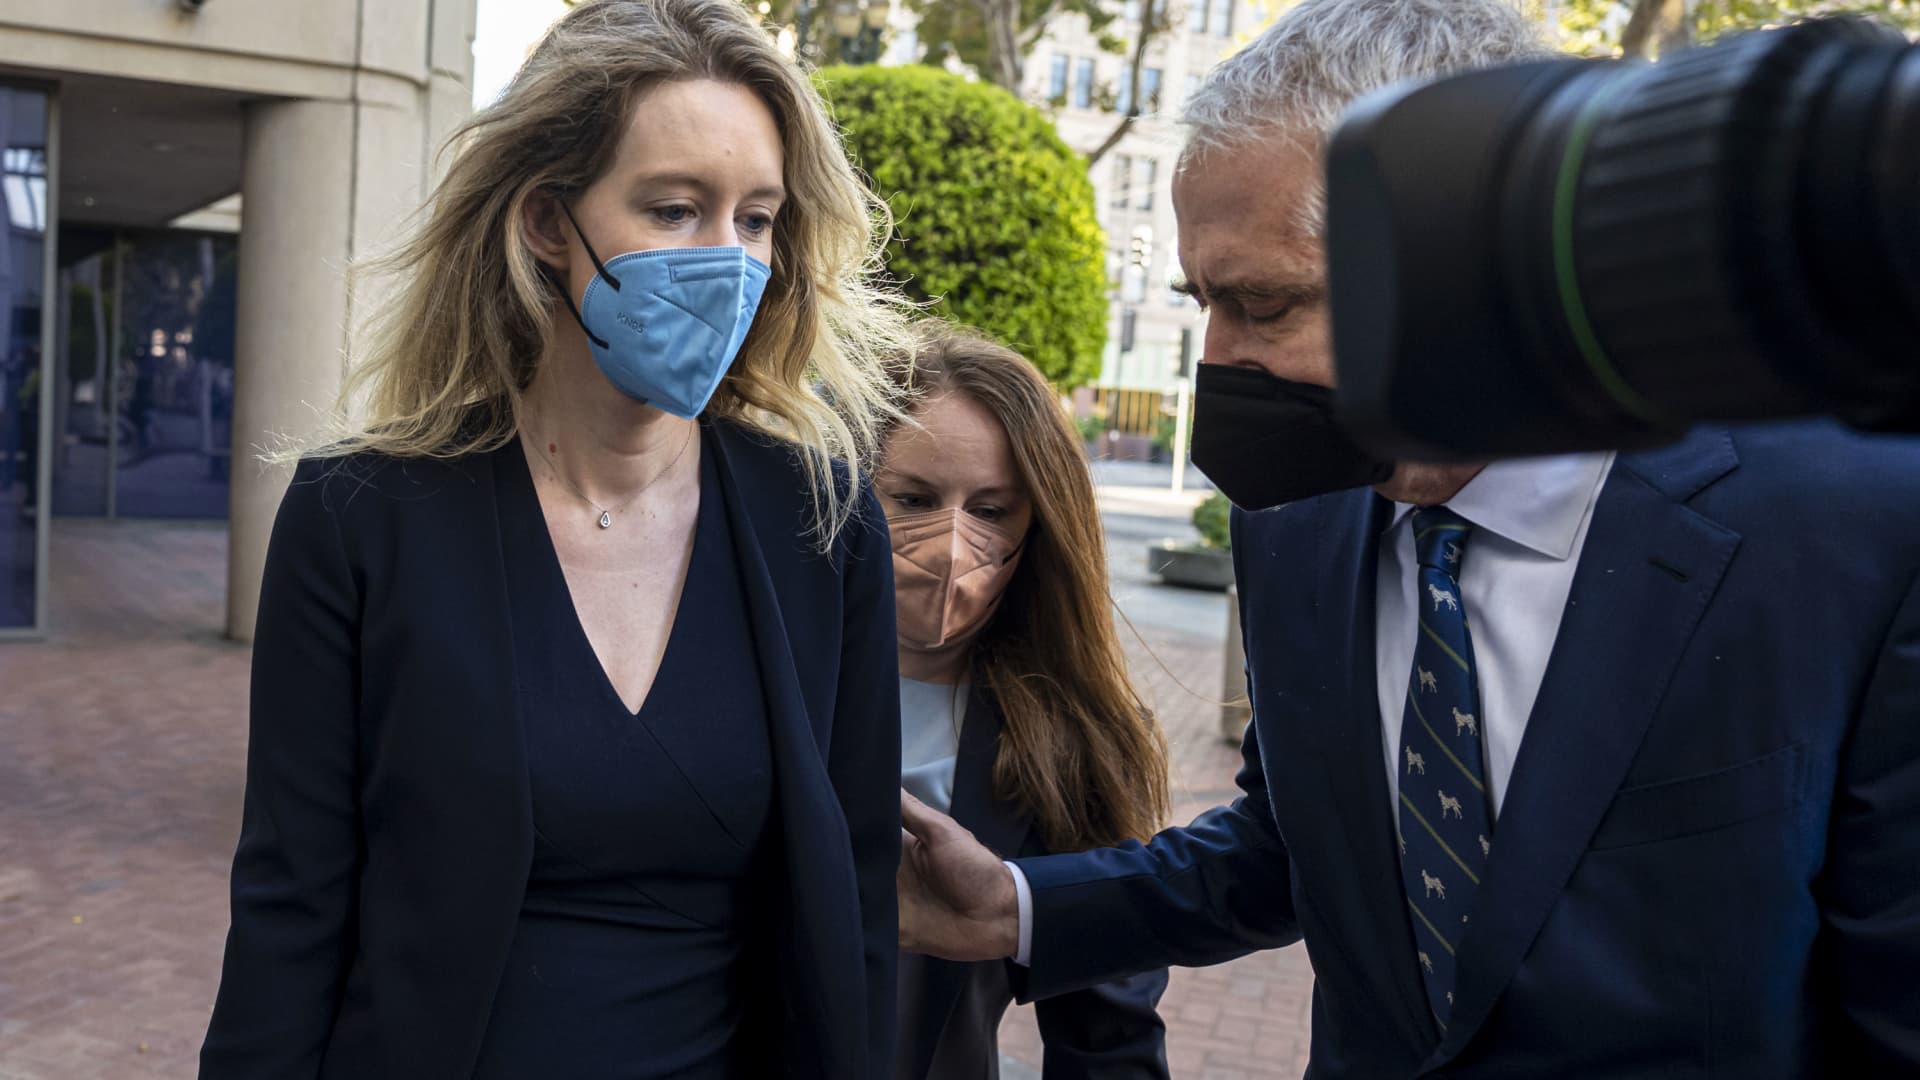 Elizabeth Holmes, founder of Theranos Inc., left, arrives at federal court in San Jose, California, on Tuesday, Aug. 31, 2021.